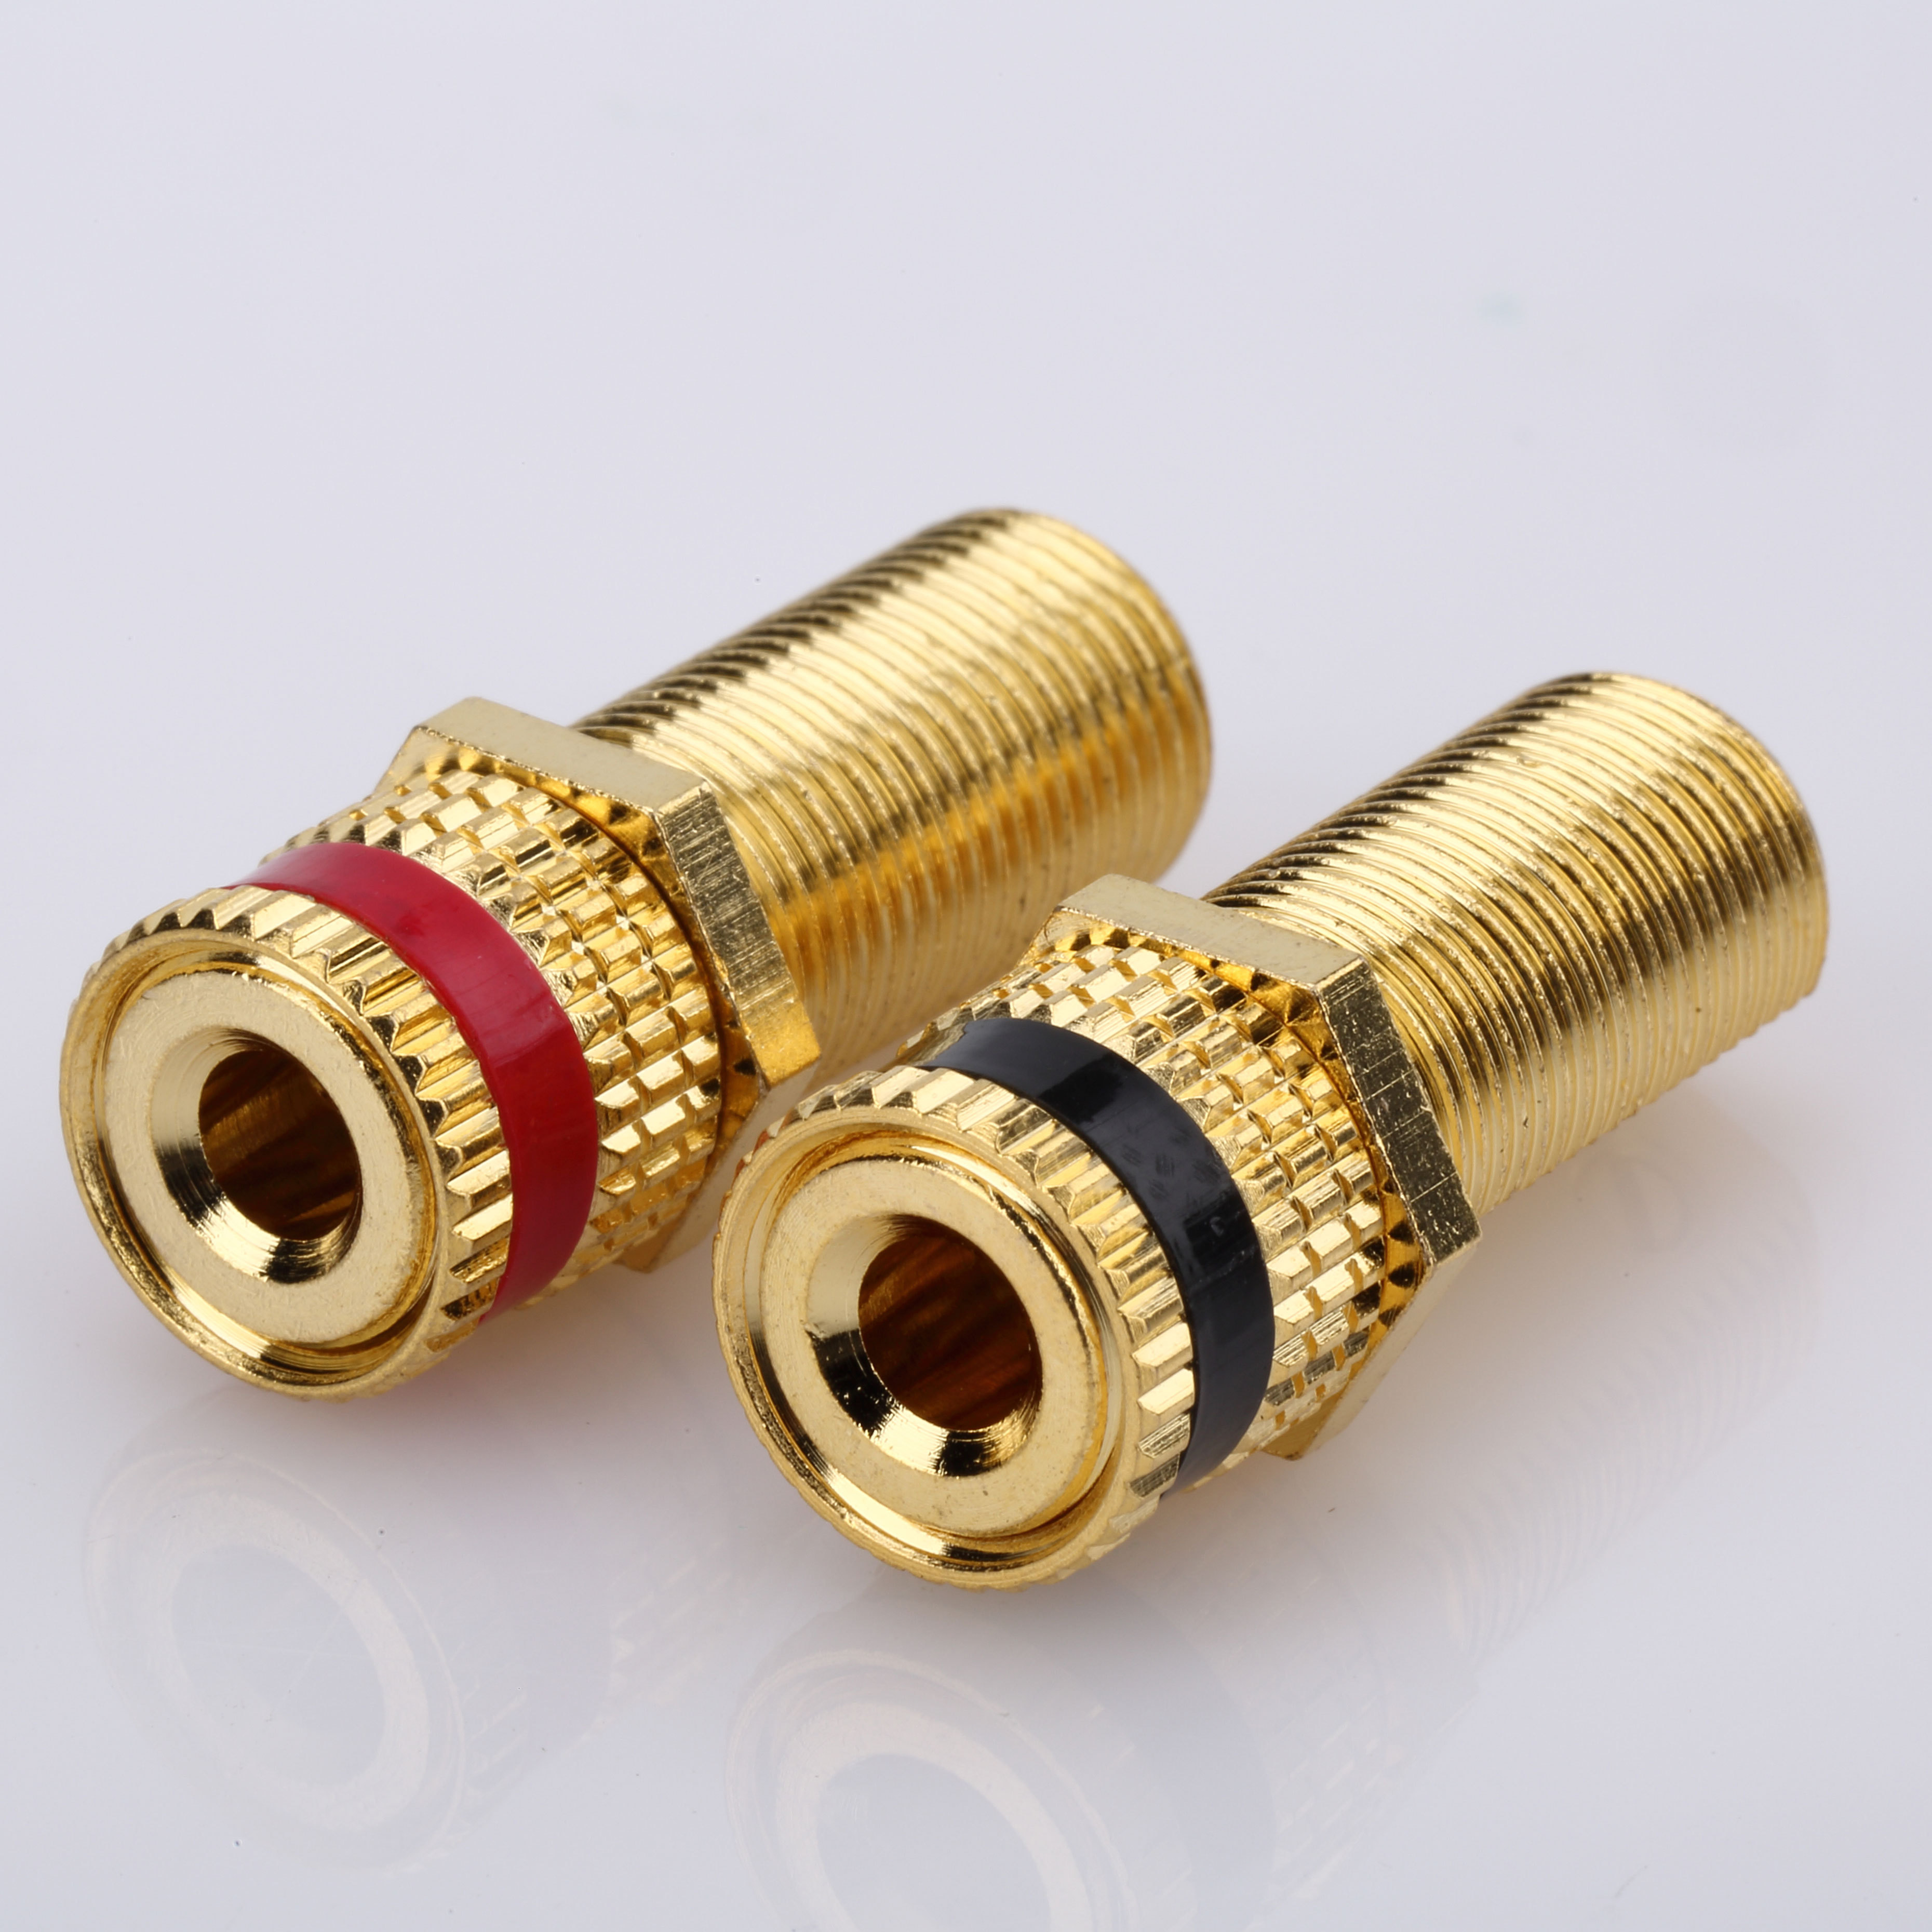 Rca Connector Rca Jack Gold Plated For Audio Using Rca Connectors